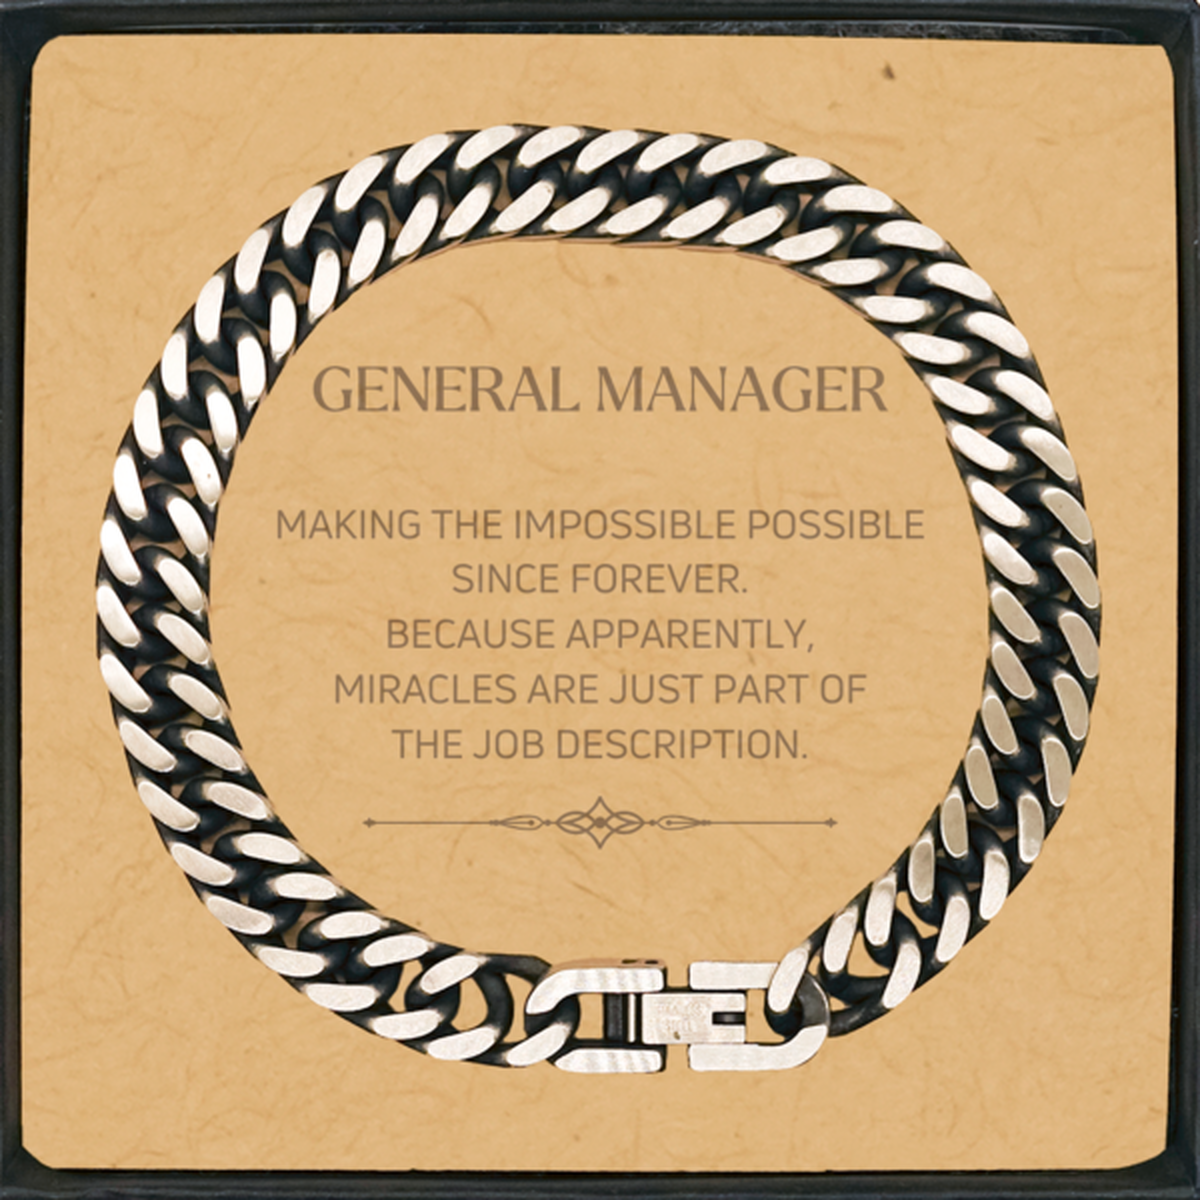 Funny General Manager Gifts, Miracles are just part of the job description, Inspirational Birthday Cuban Link Chain Bracelet For General Manager, Men, Women, Coworkers, Friends, Boss